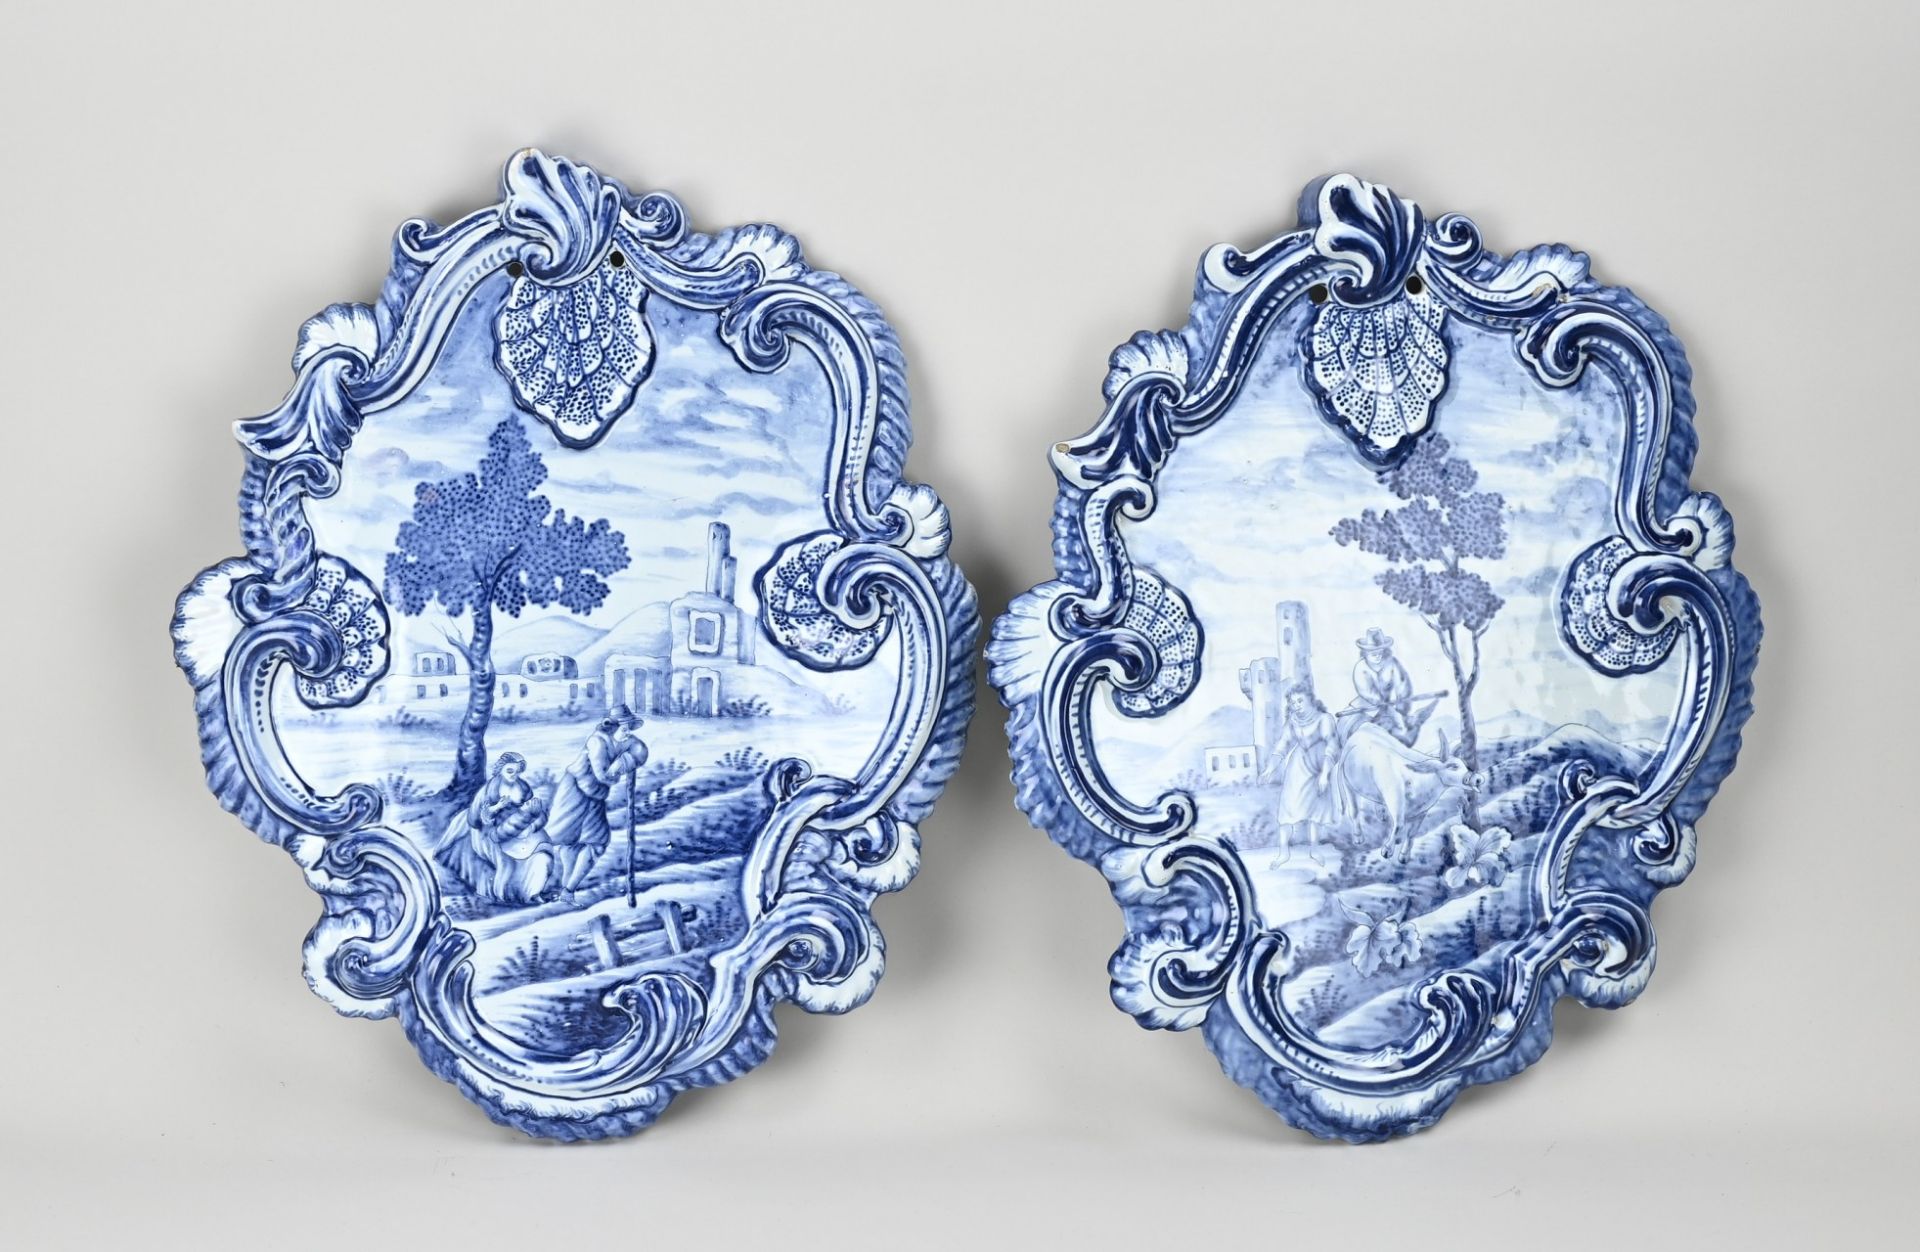 Two Delft plaques